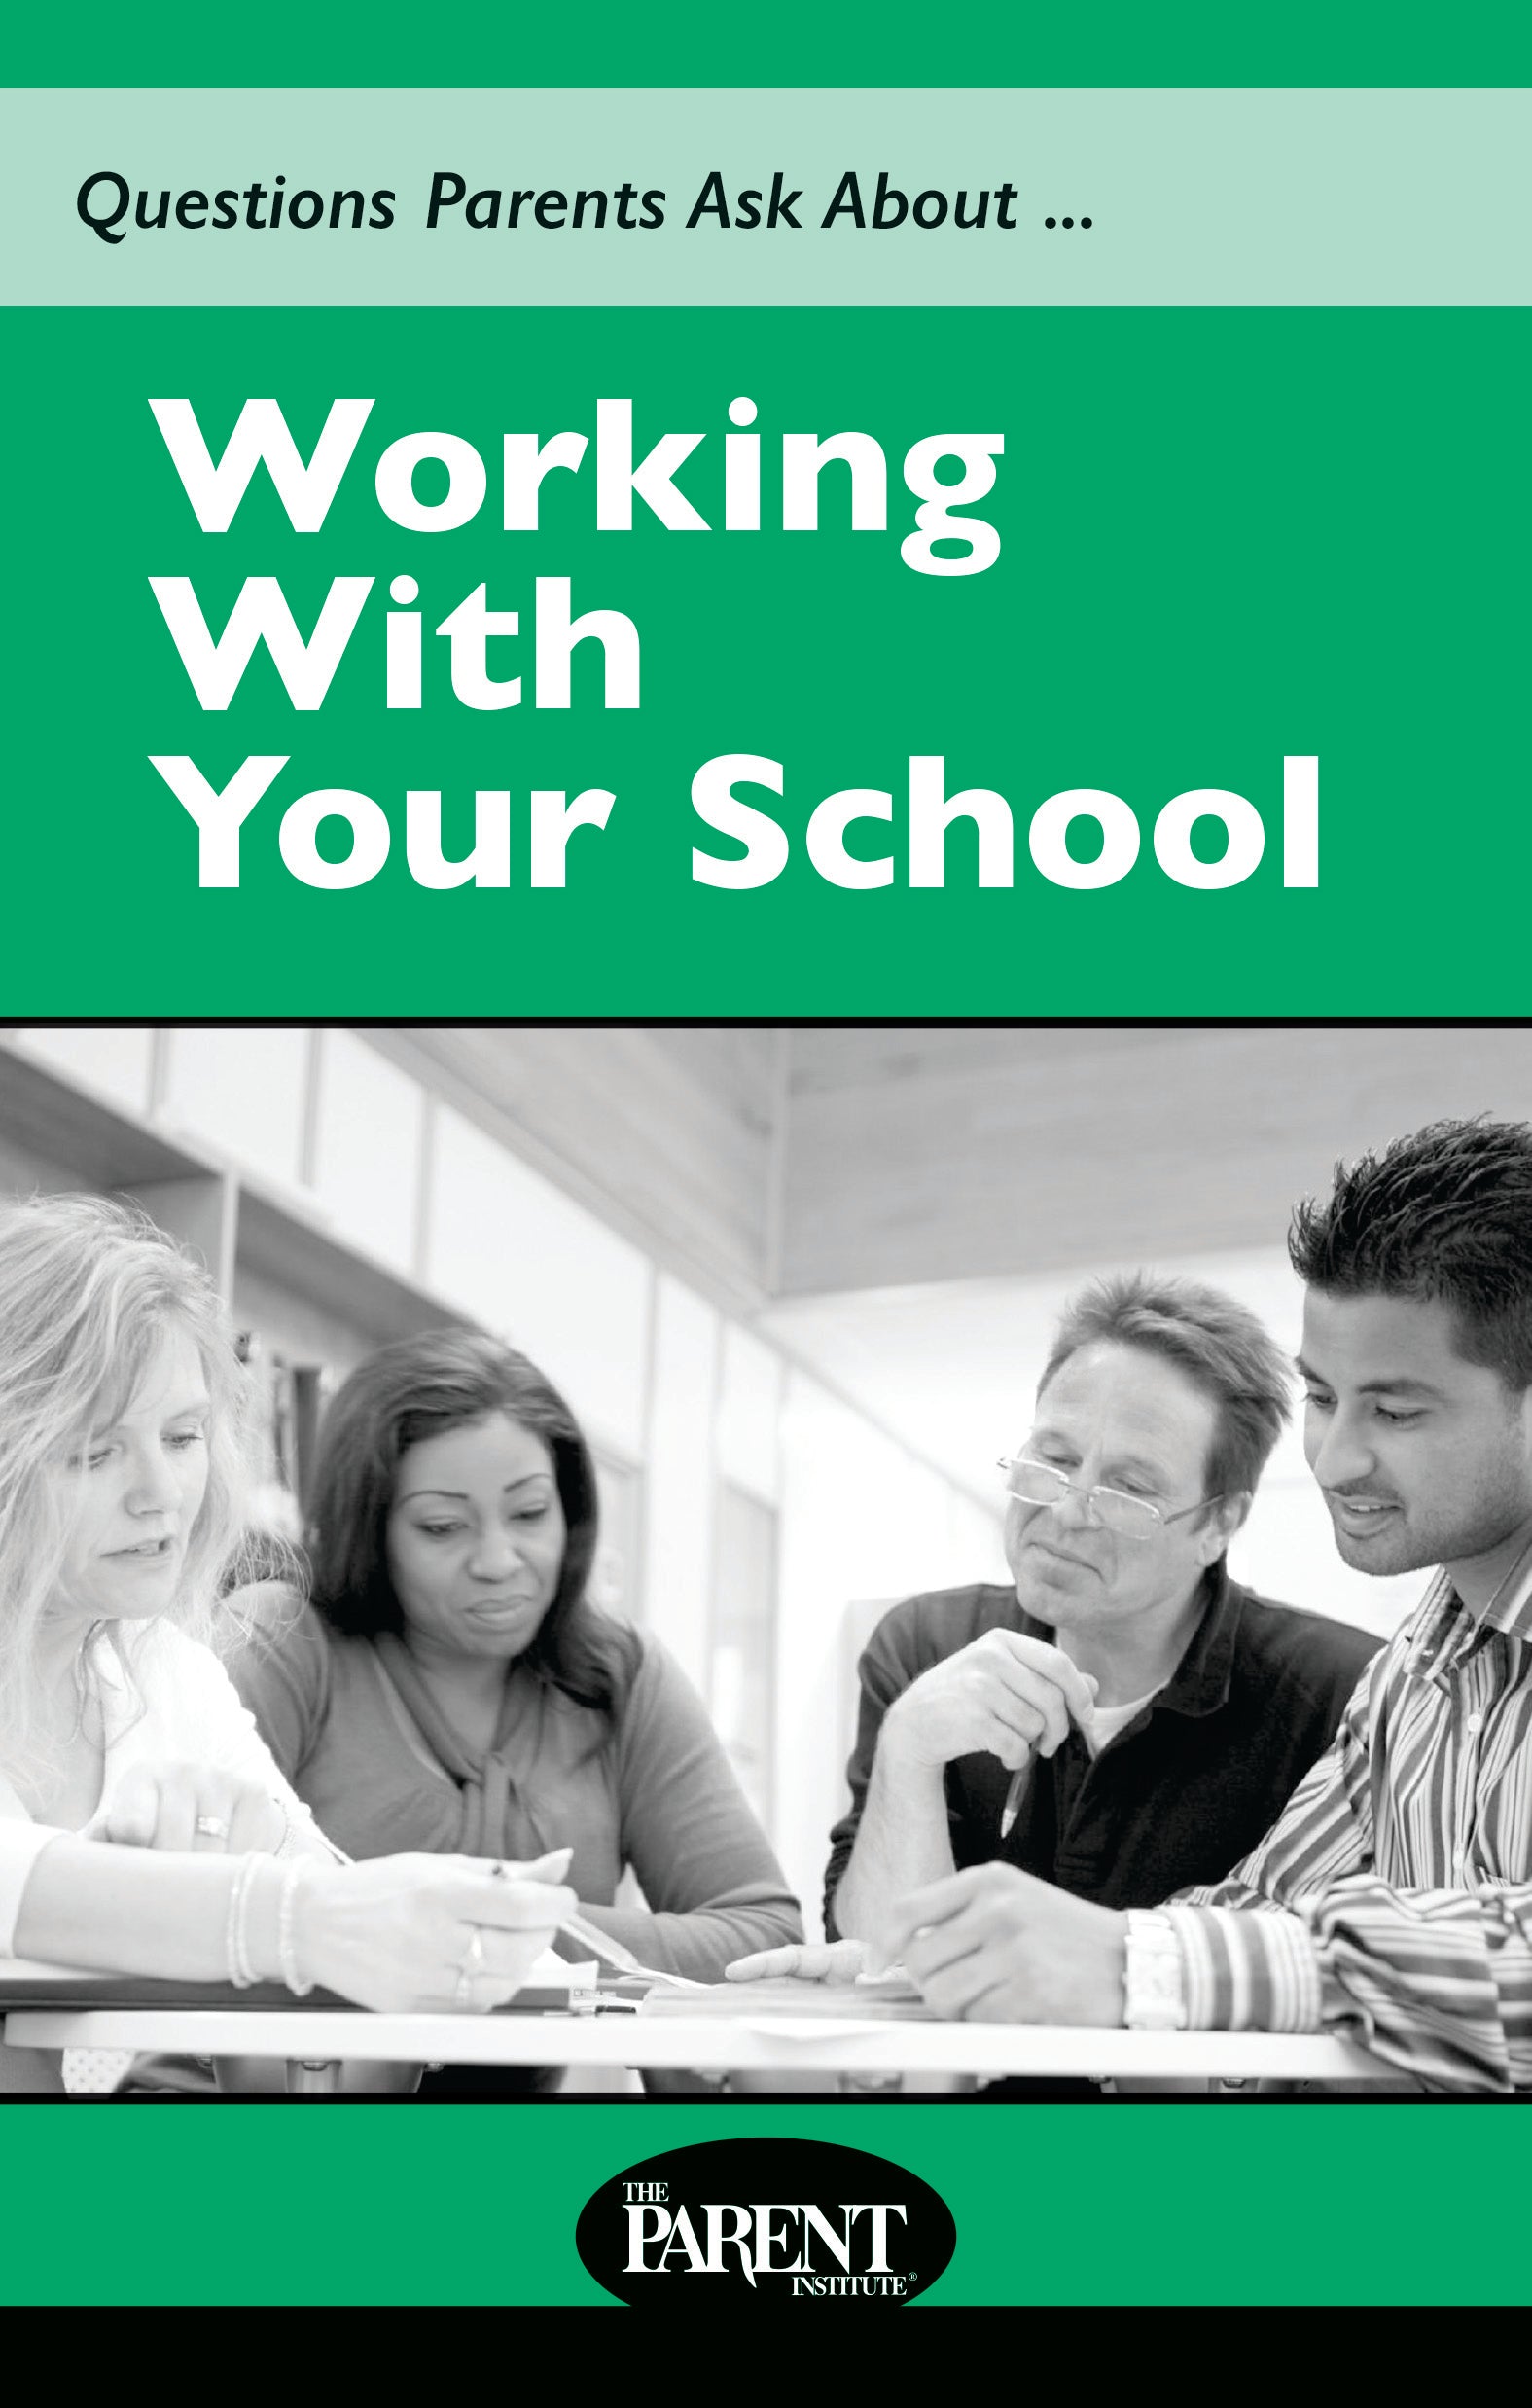 Questions Parents Ask About... Working with Your School